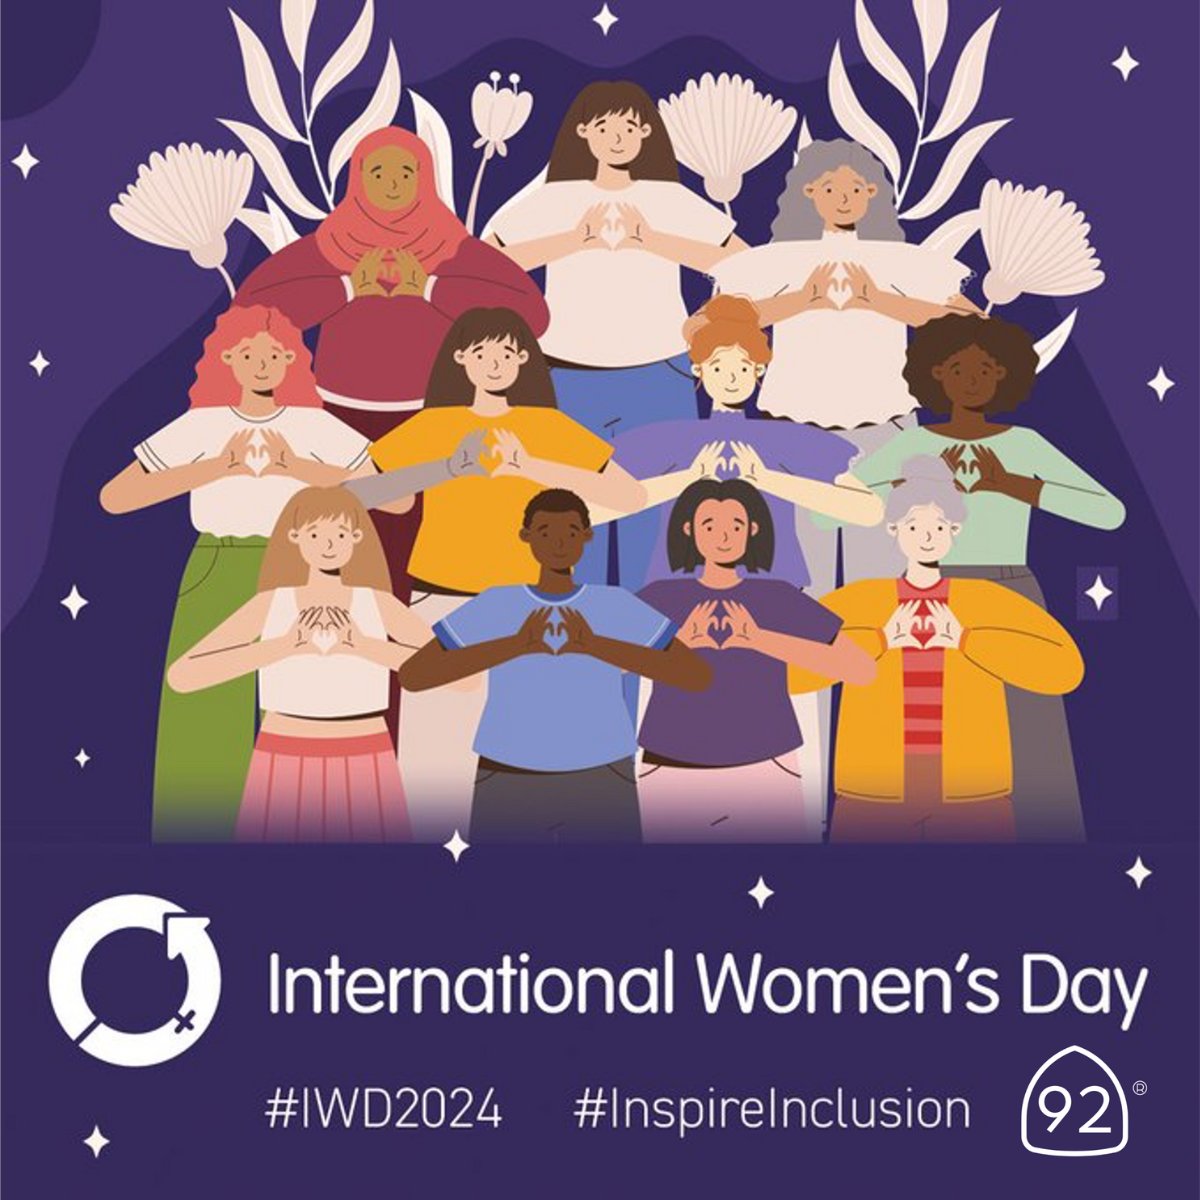 This #InternationalWomensDay we celebrate the achievements of the women at #Route92Medical and beyond. Happy International Women’s Day to all who #InspireInclusion in our space and across our communities! #IWD24